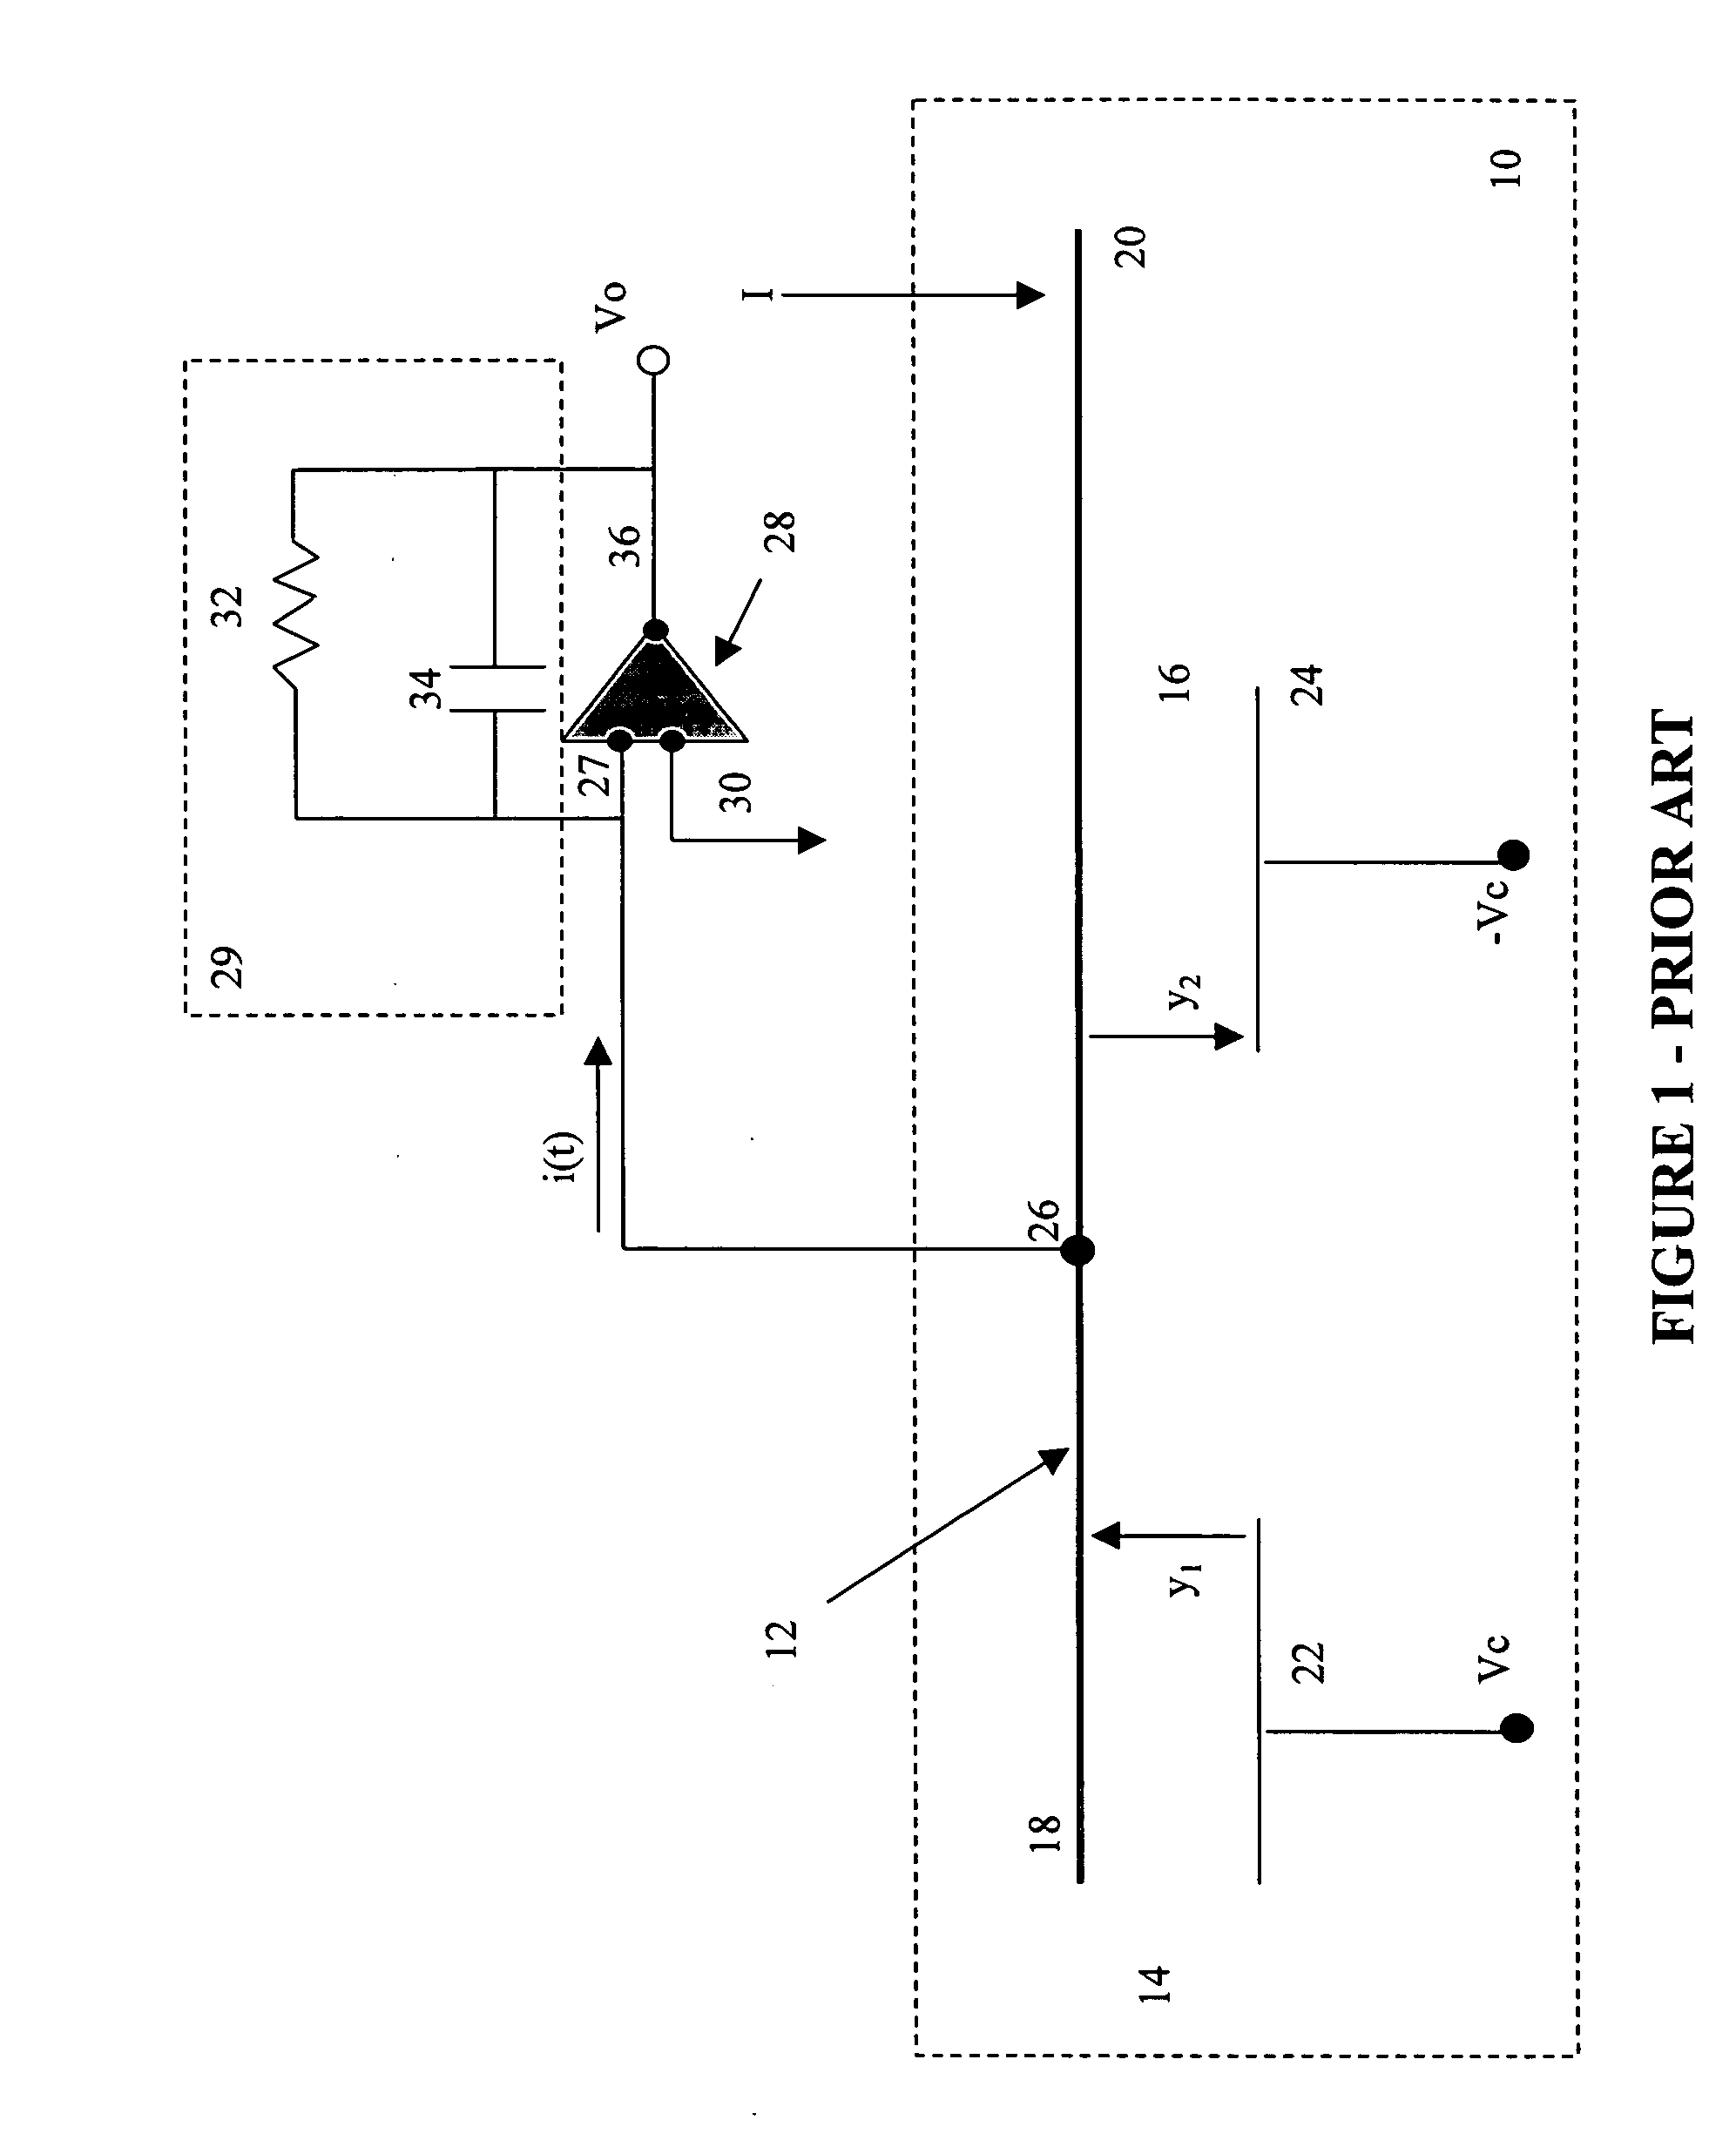 Apparatus for and method of sensing a measured input